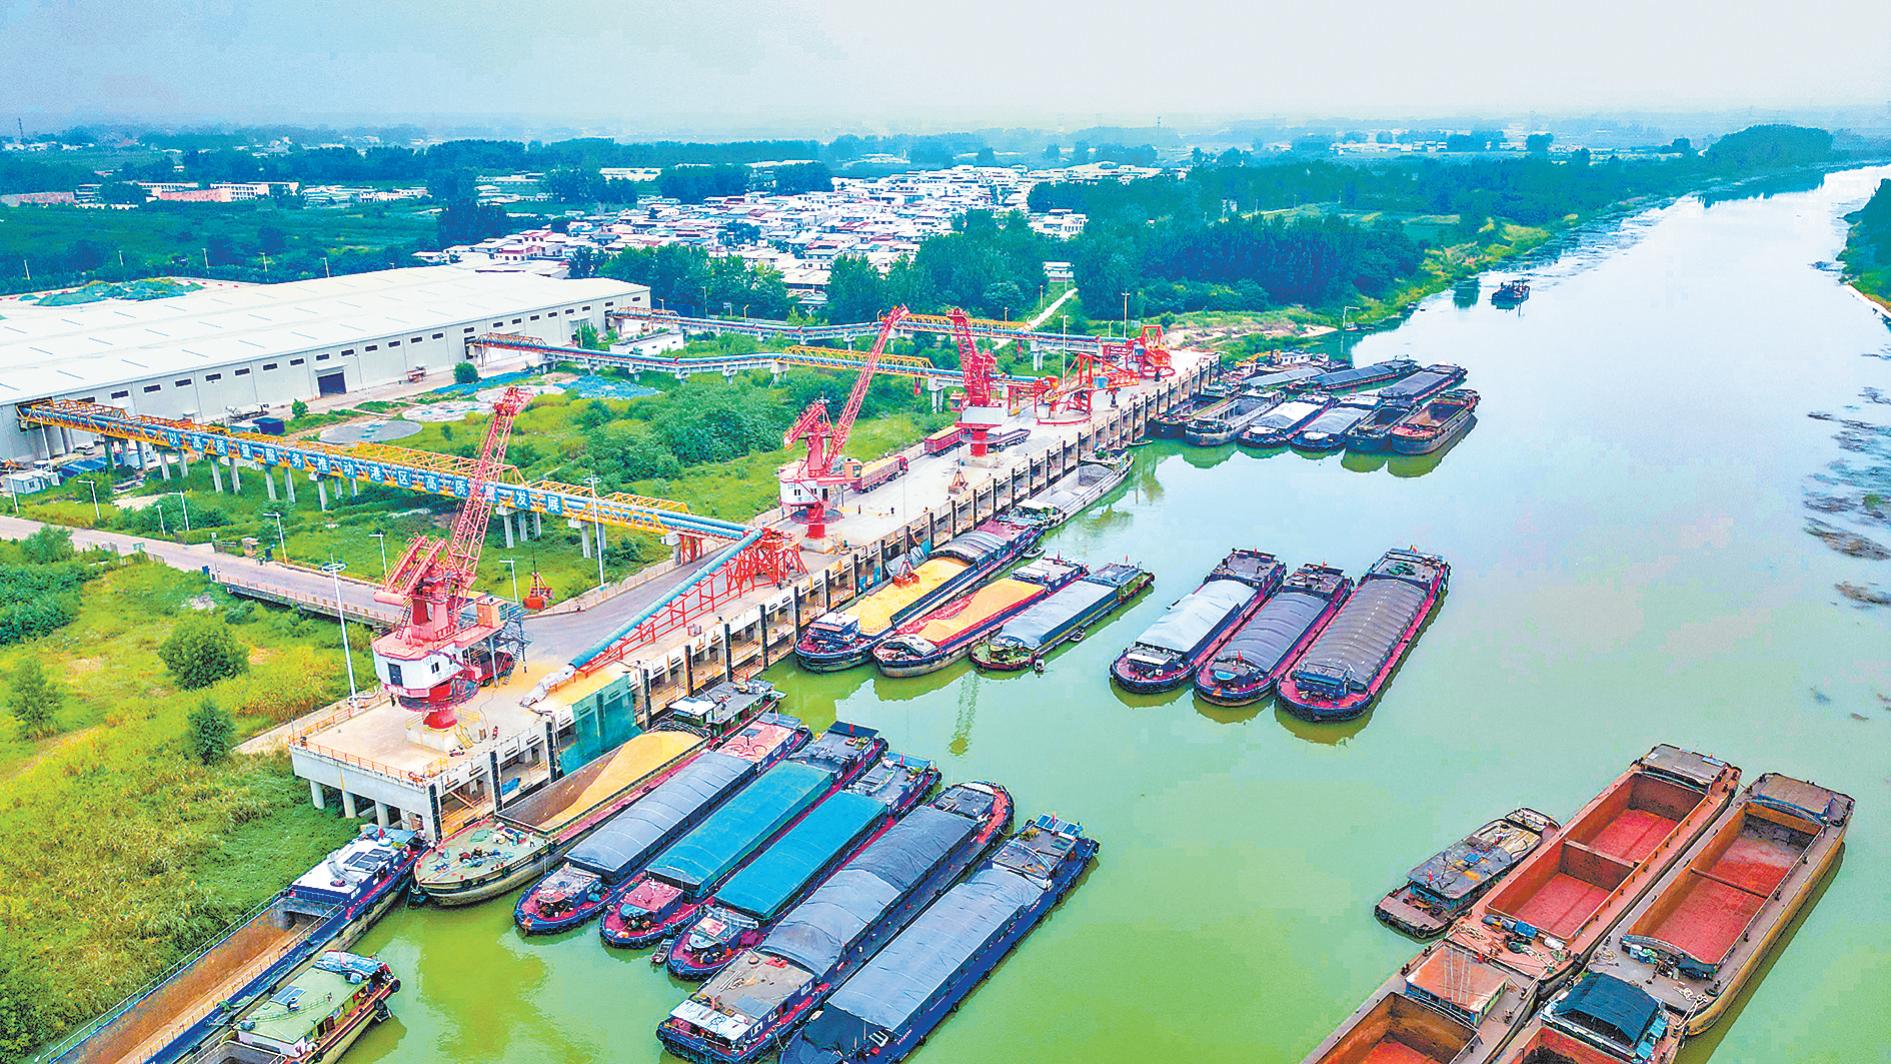 The busy Luohe Port